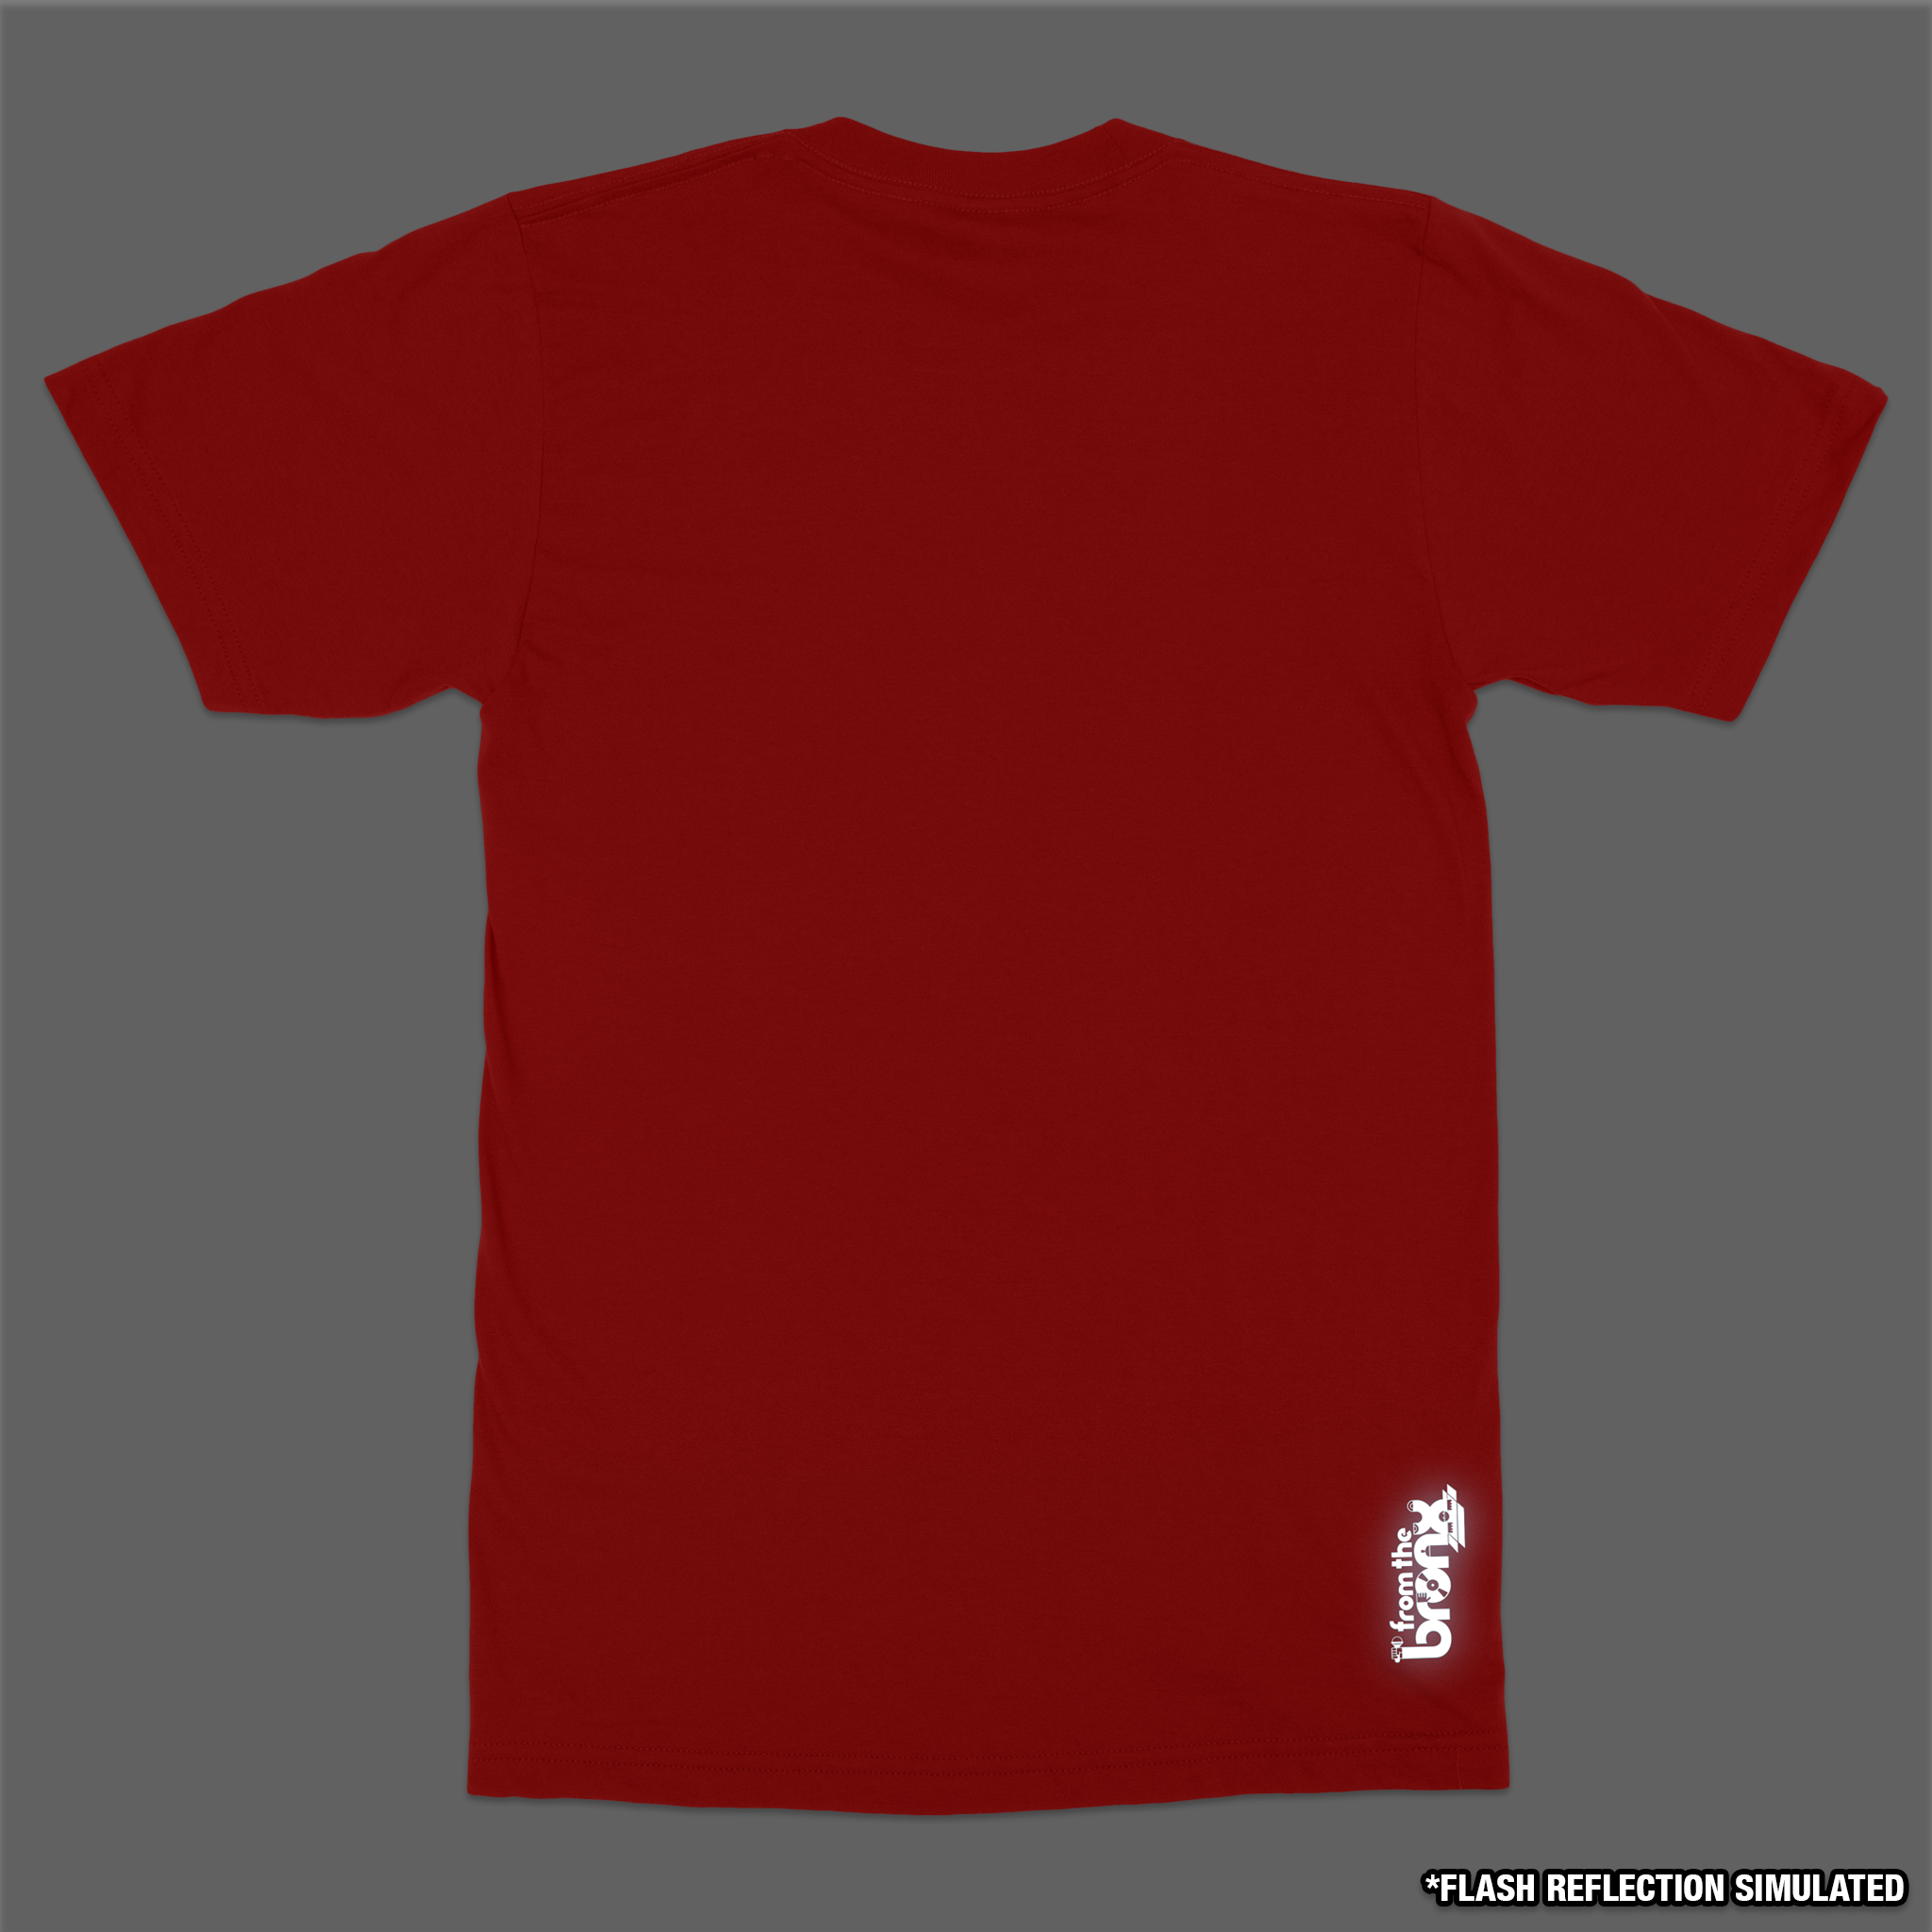 Boogie Down Bronx Reflective T-Shirt Back in Red with Simulated Reflection